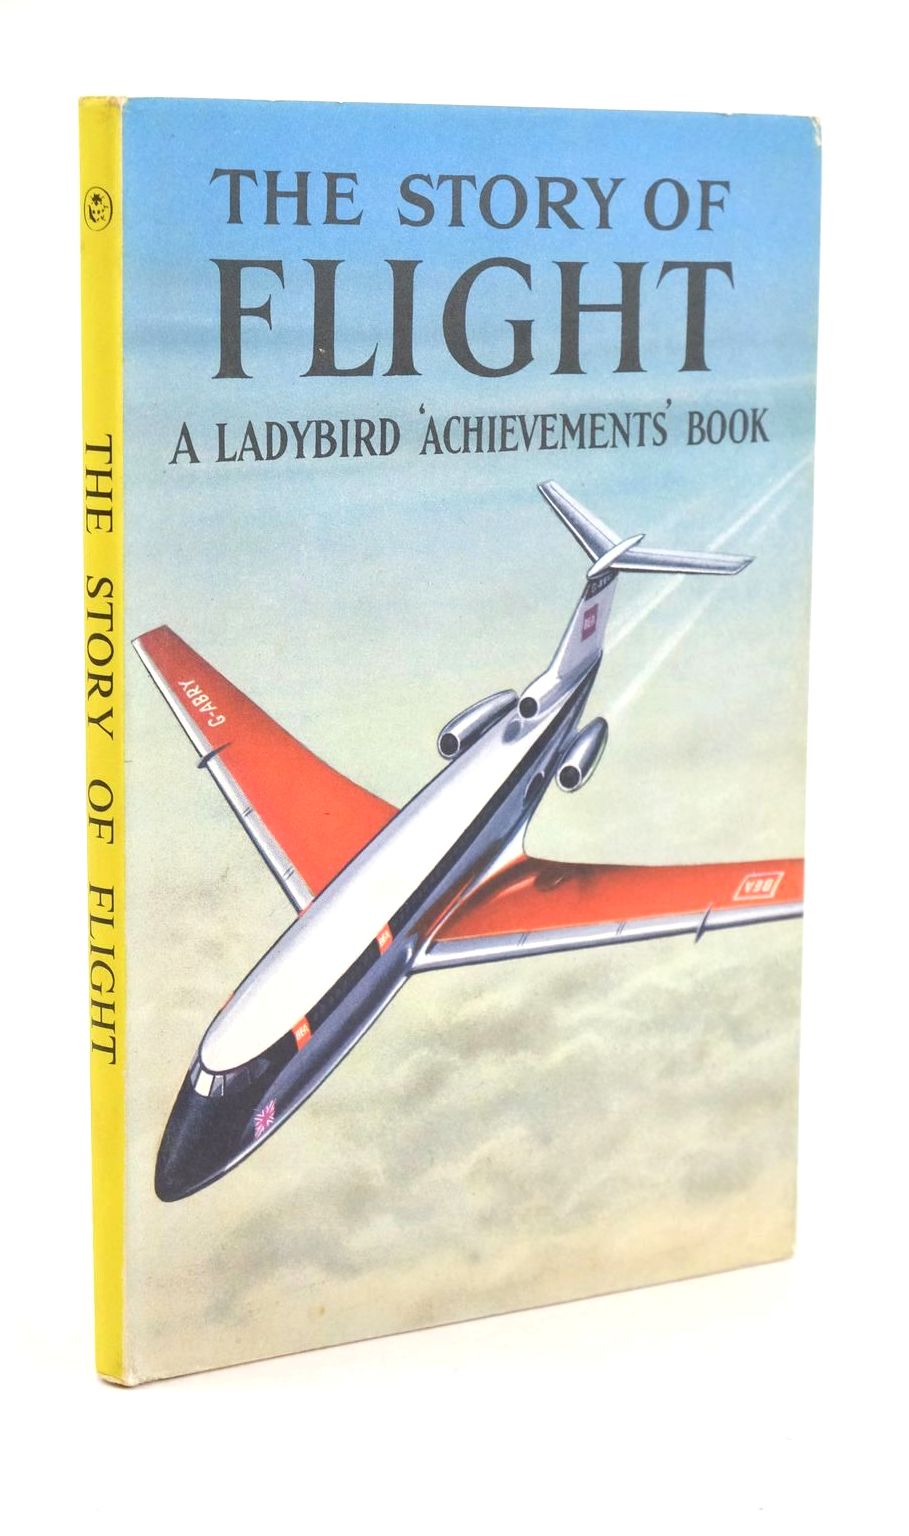 Photo of THE STORY OF FLIGHT written by Bowood, Richard illustrated by Ayton, Robert published by Wills &amp; Hepworth Ltd. (STOCK CODE: 1324671)  for sale by Stella & Rose's Books